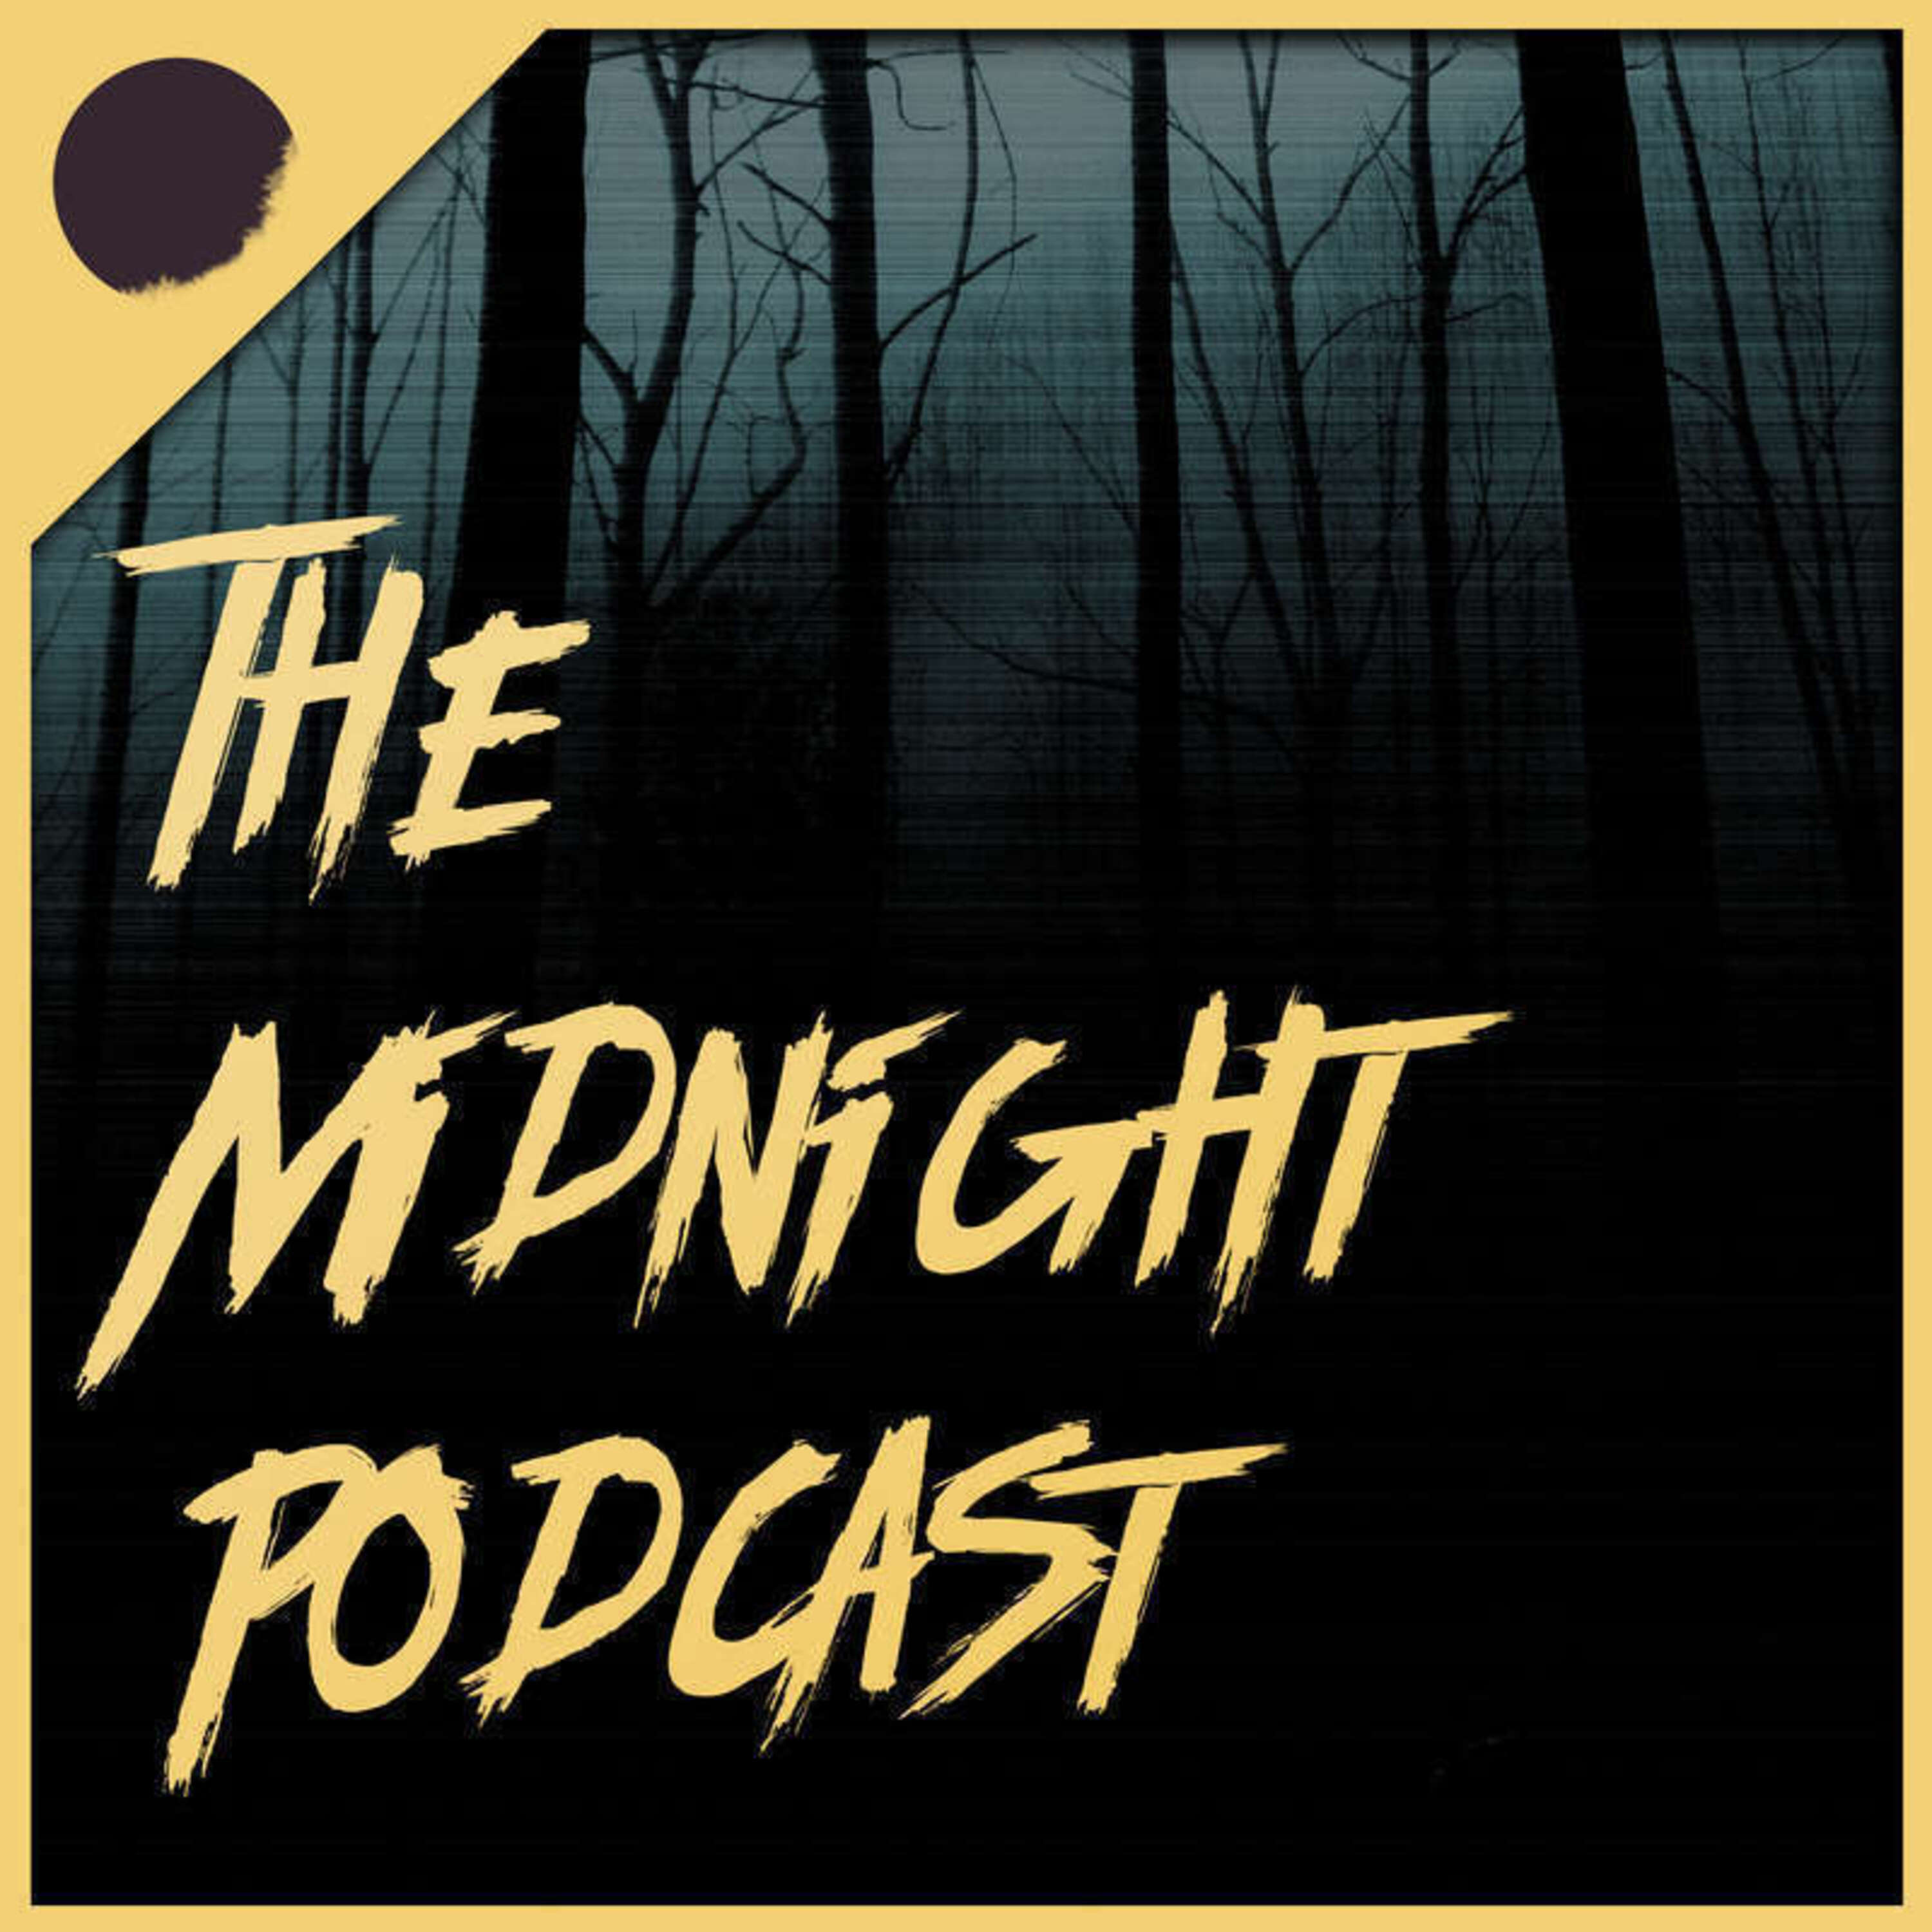 Episode 124 | There's a strange newspaper that's only delivered at midnight | Part 10